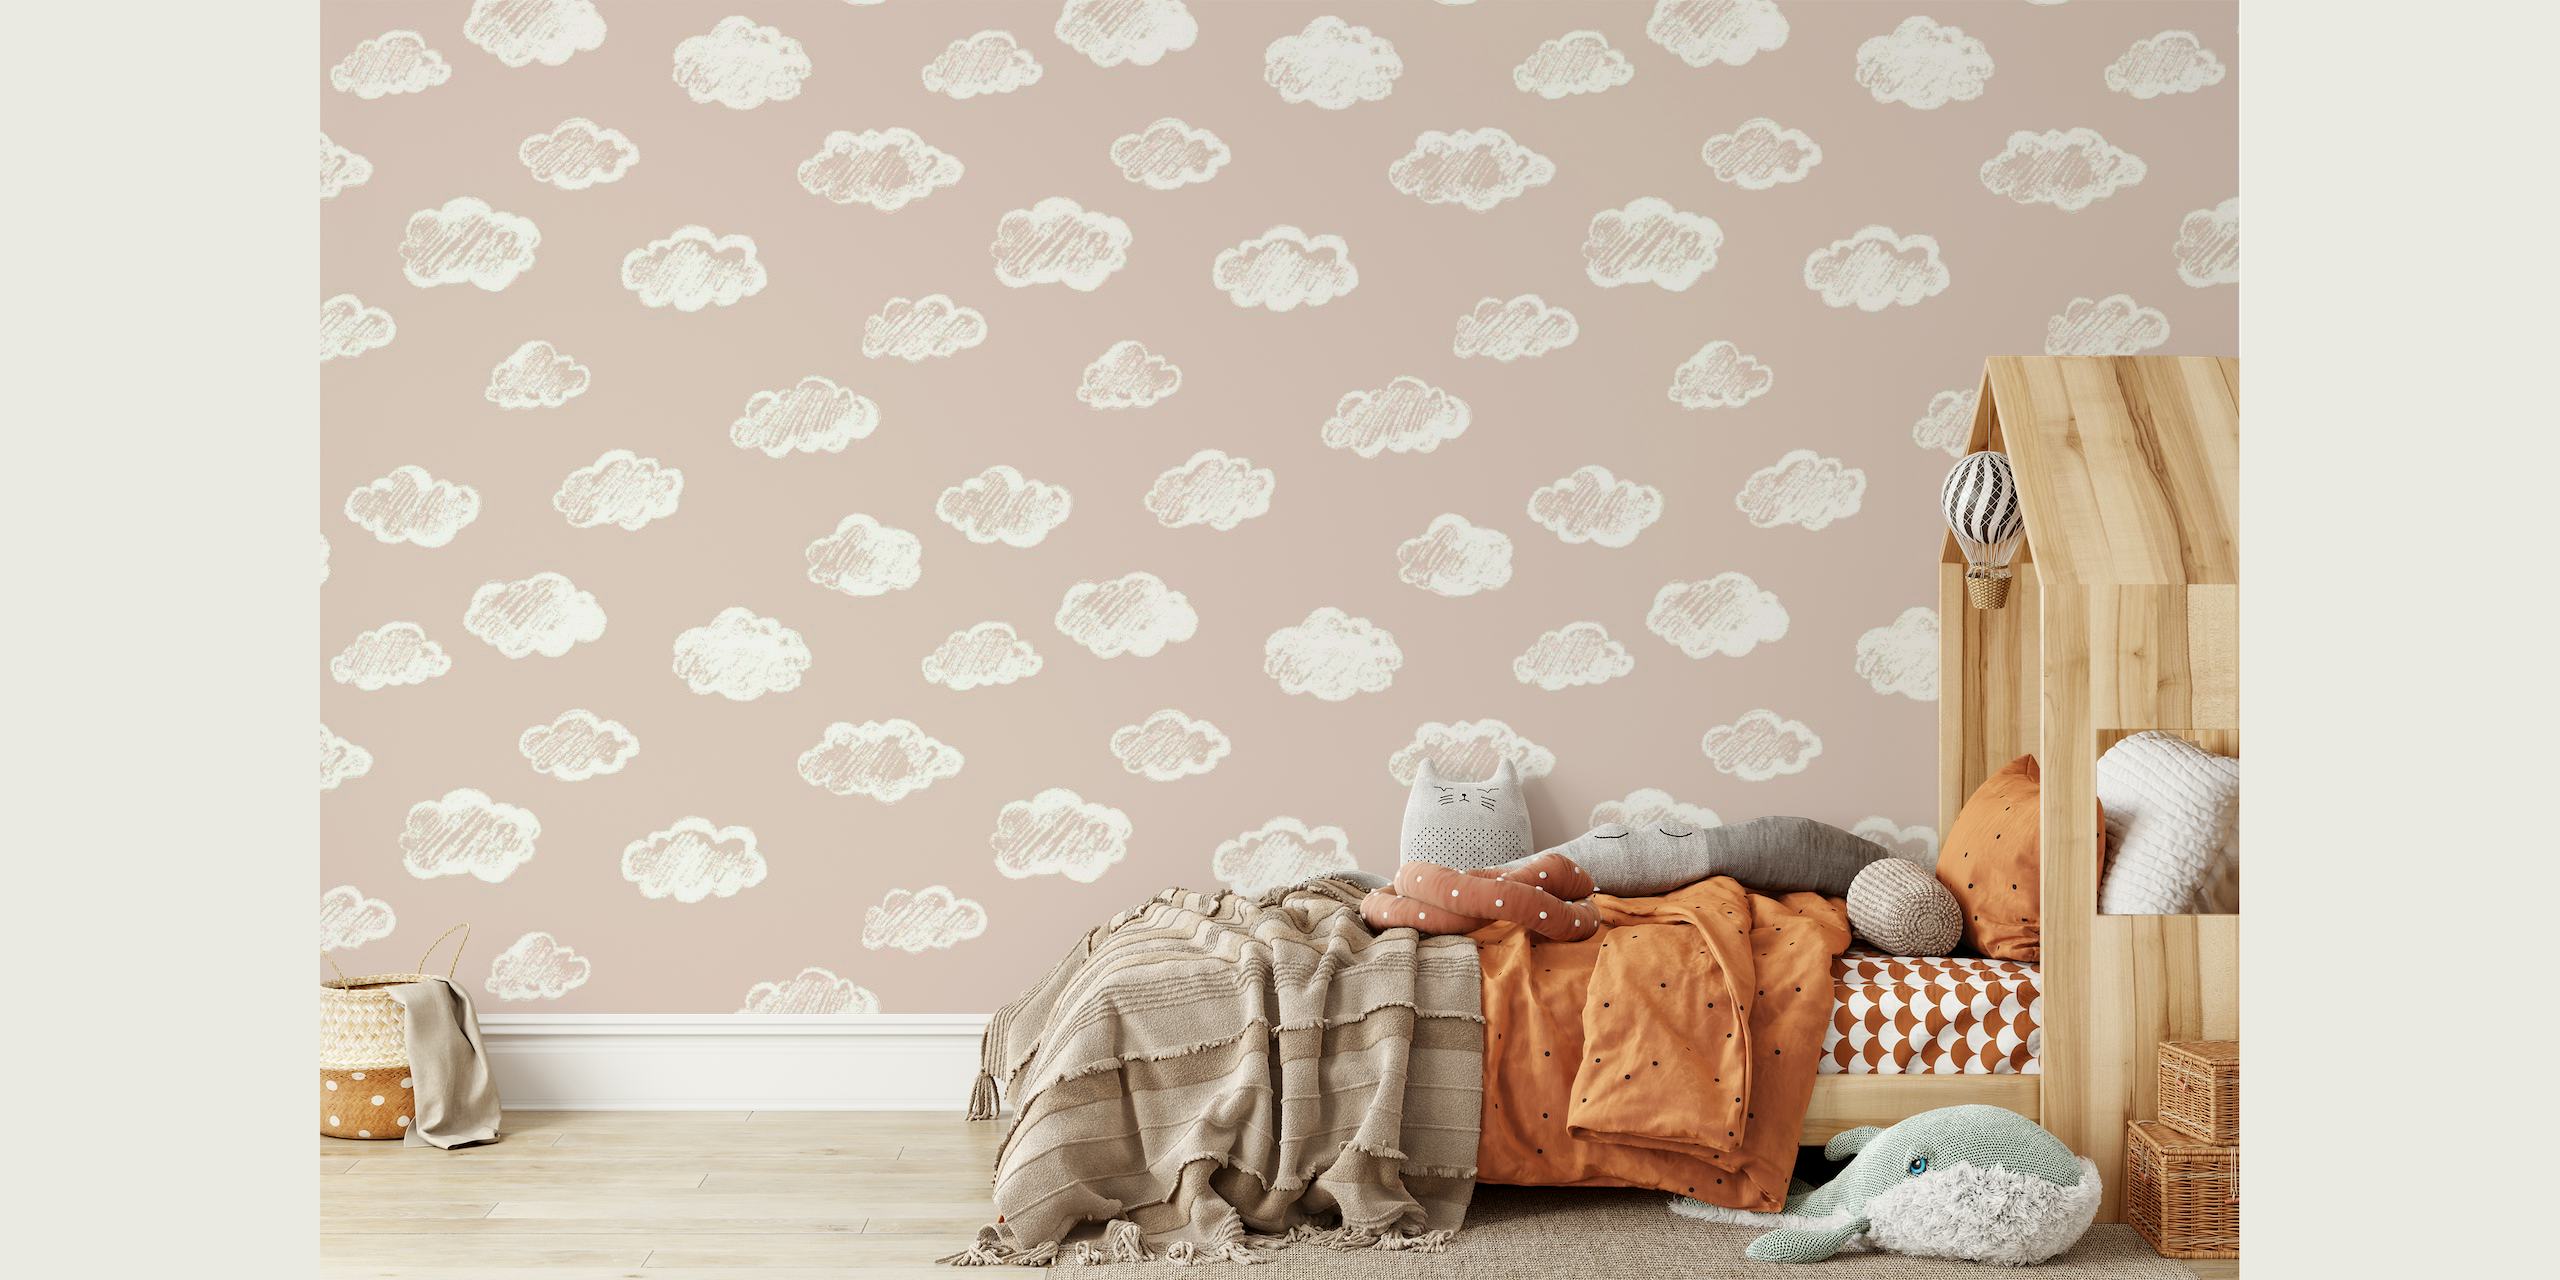 Chalk Clouds On Blush Pink wallpaper - Happywall